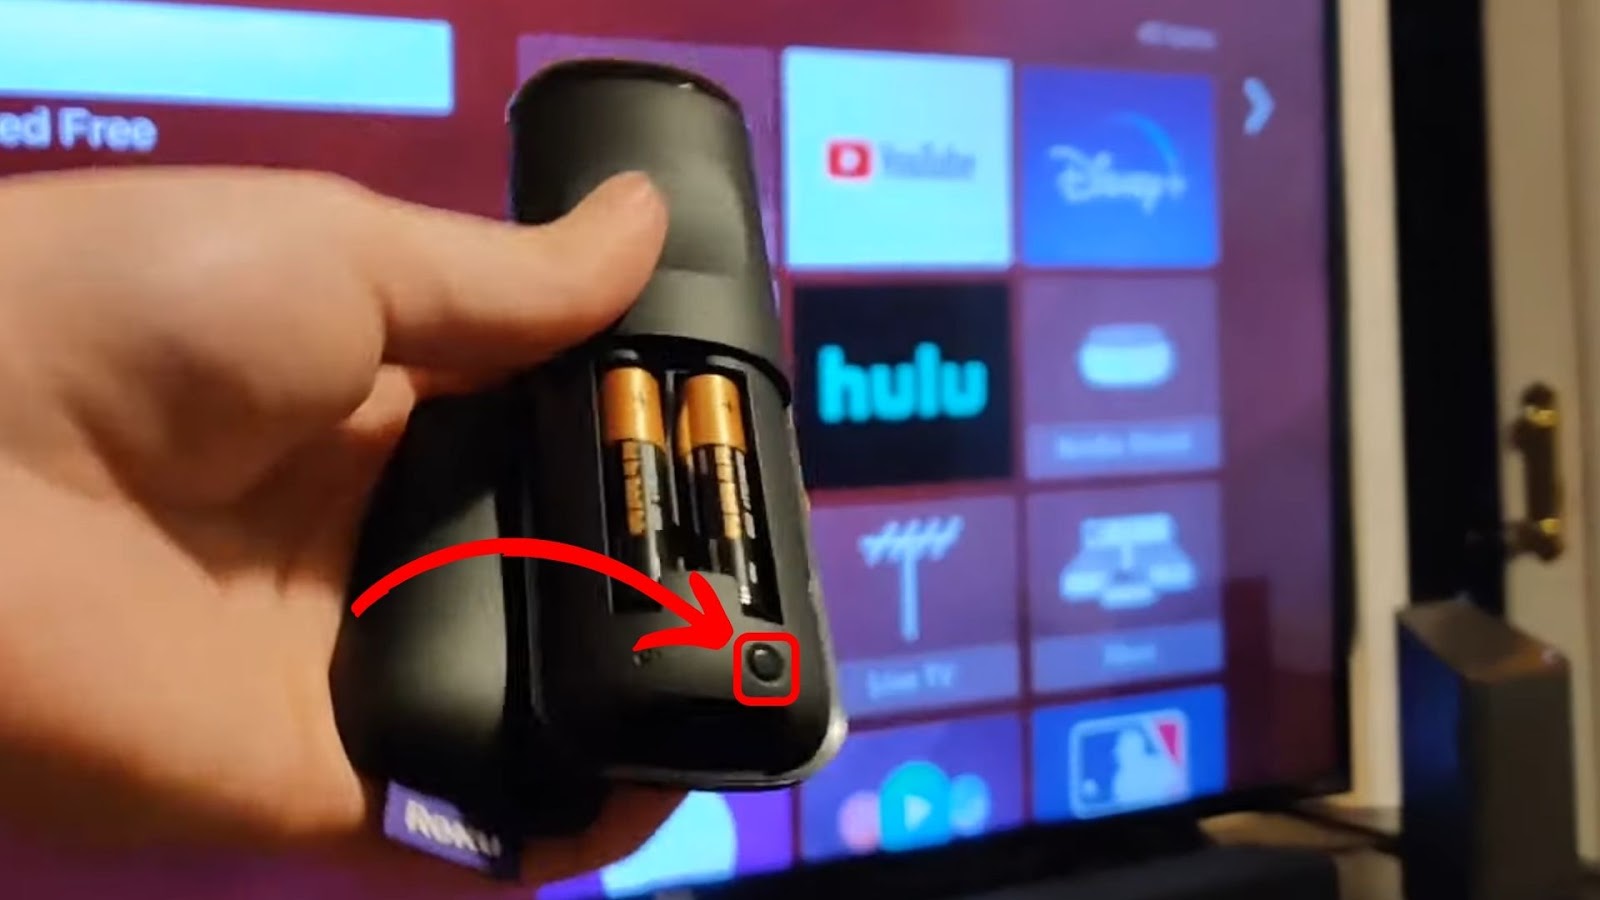 How to Find the Pairing Button on Onn Roku Remote